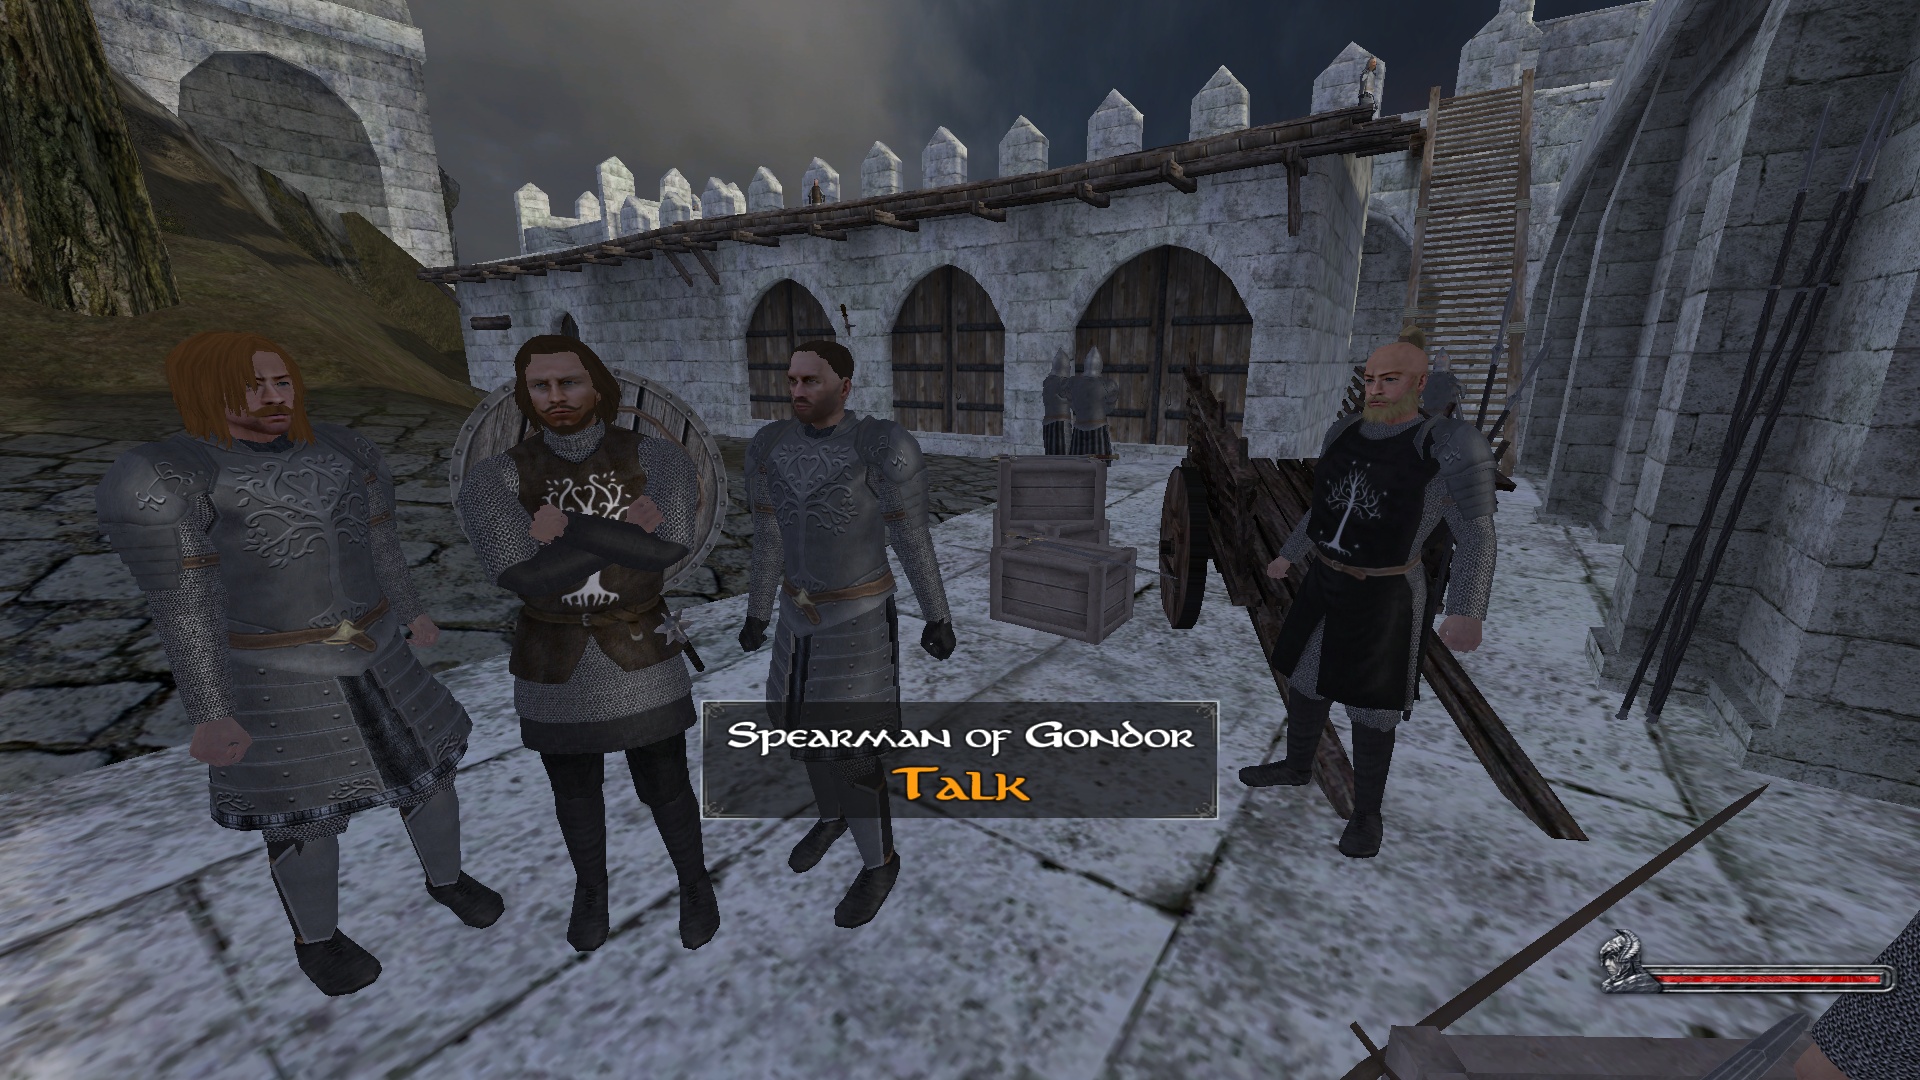 Last days warband. Mount and Blade Warband the last Days. Арагорн Mount and Blade. Mount & Blade: Warband - the last Days (of the third age of Middle Earth). Эребор Mount and Blade last Days.